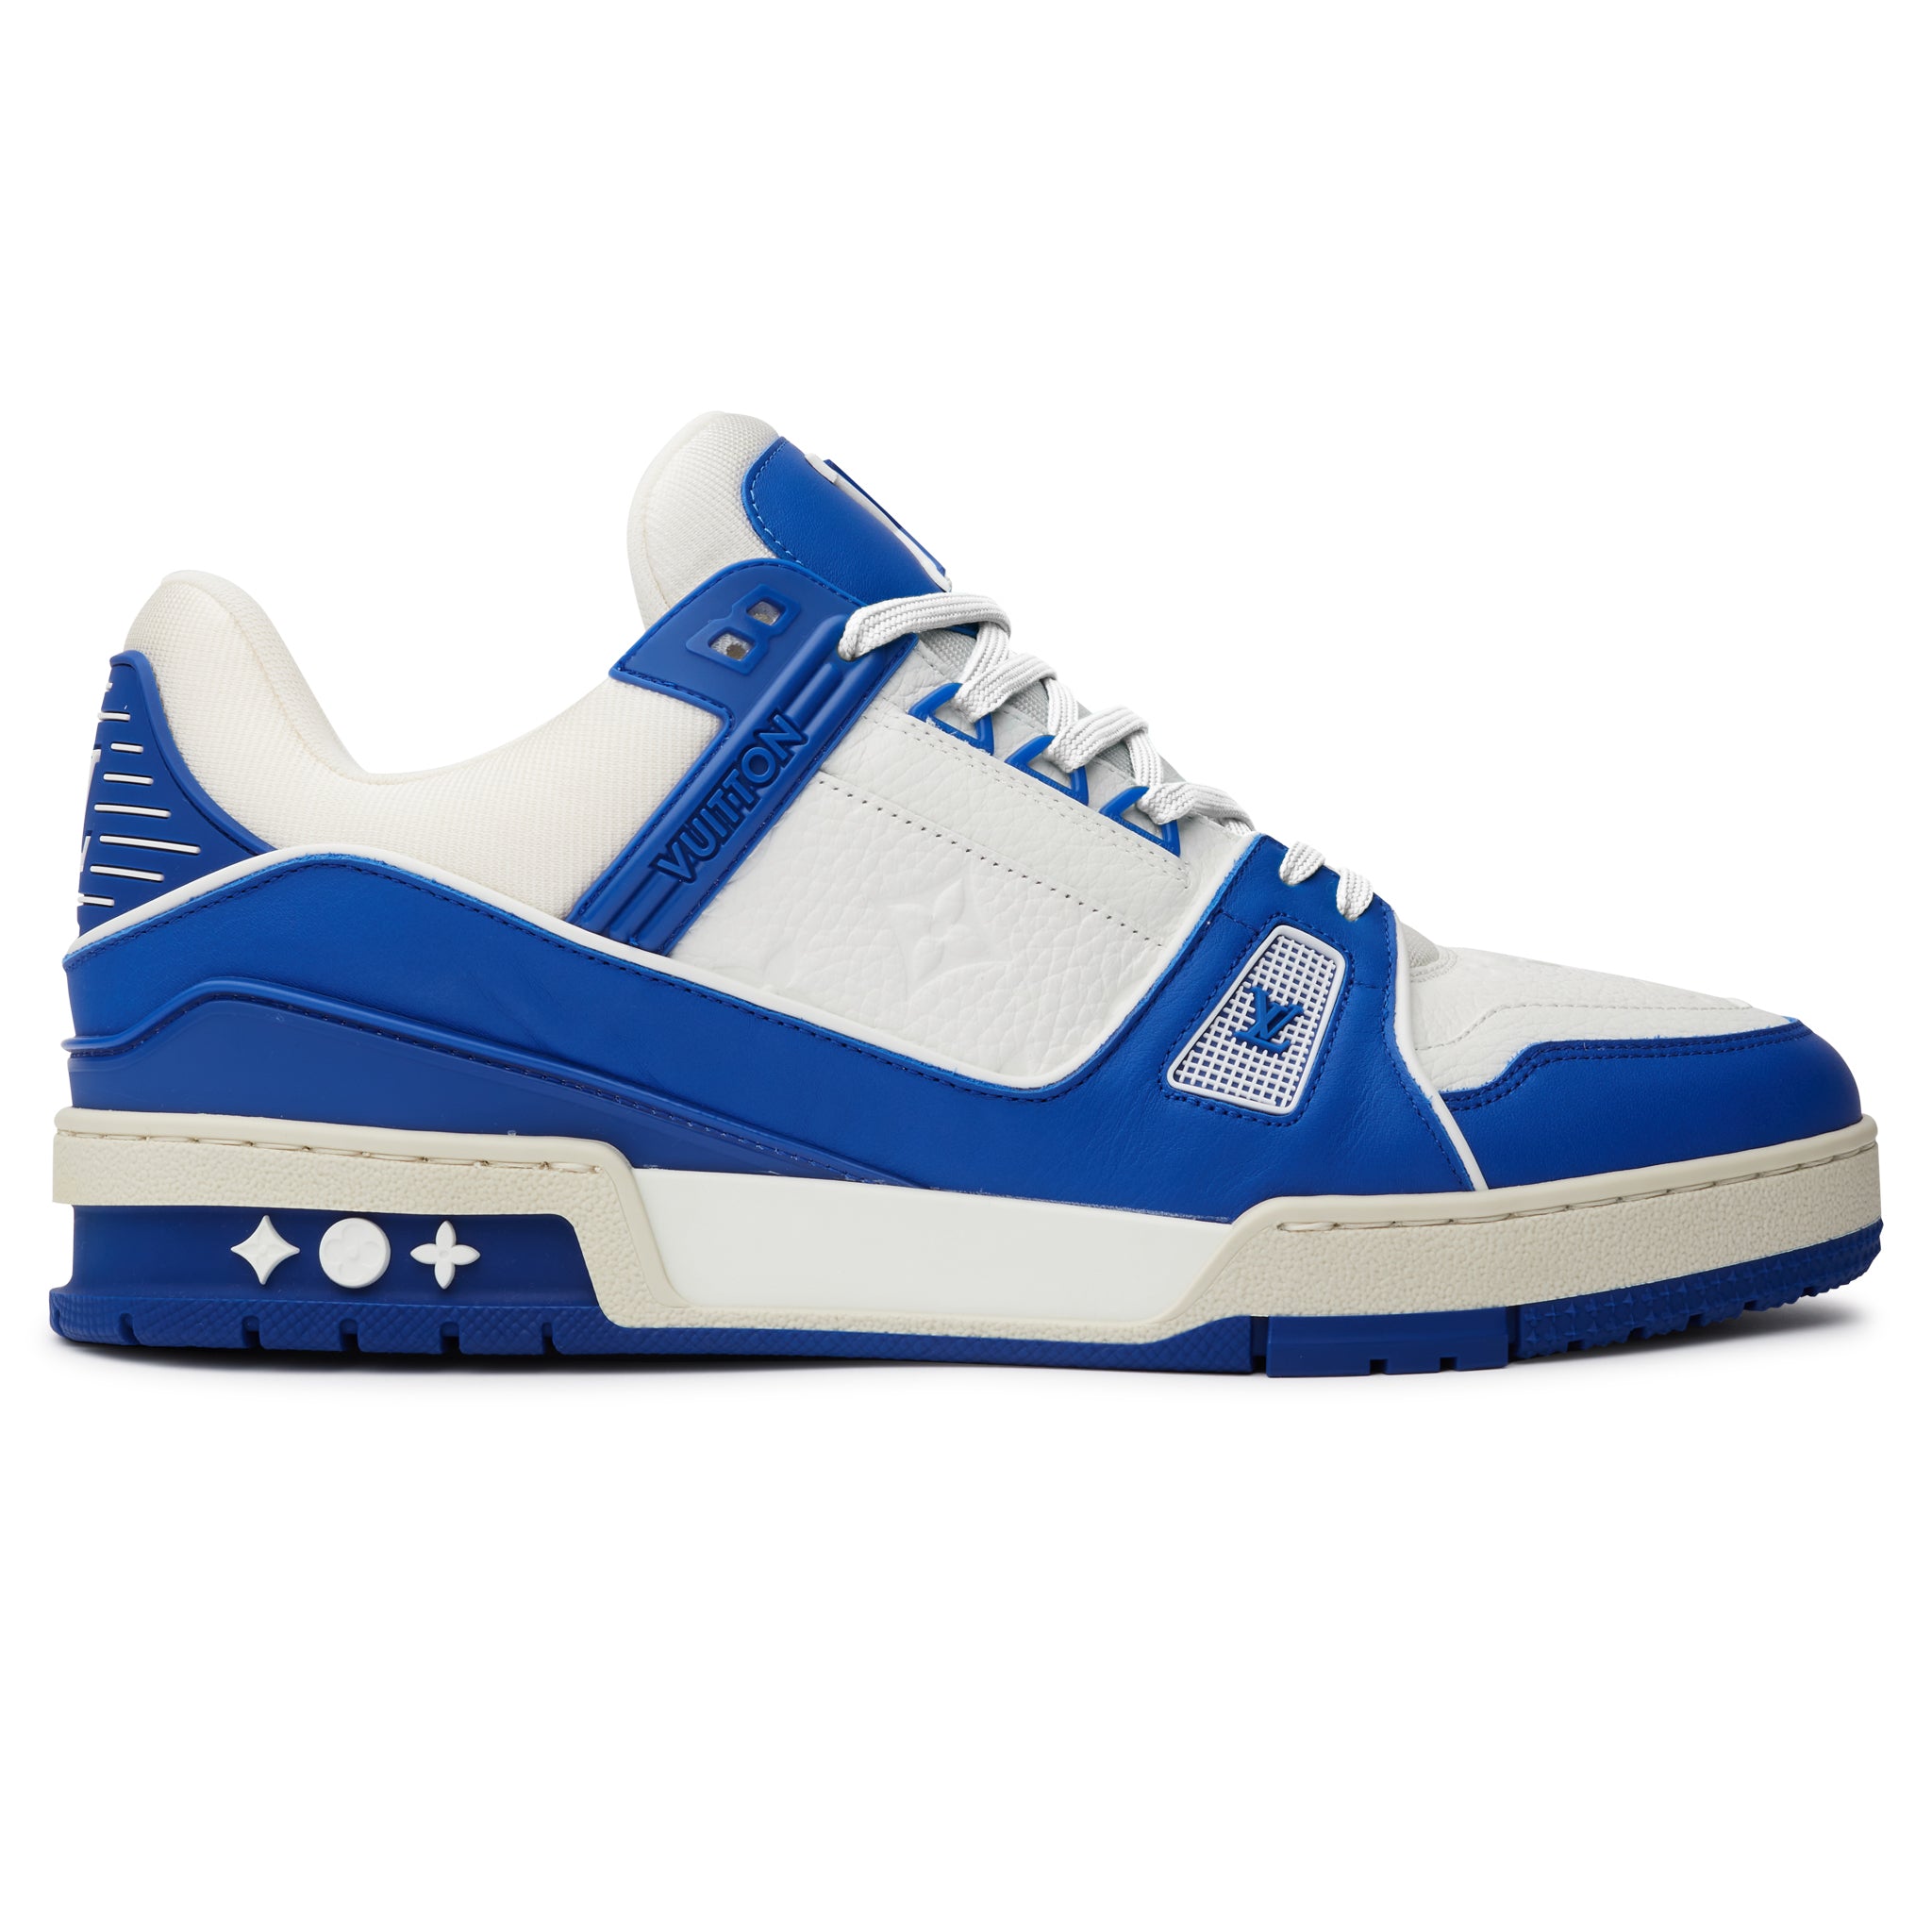 Pre-owned Louis Vuitton Lv Trainer White Ss21 In White/black/blue